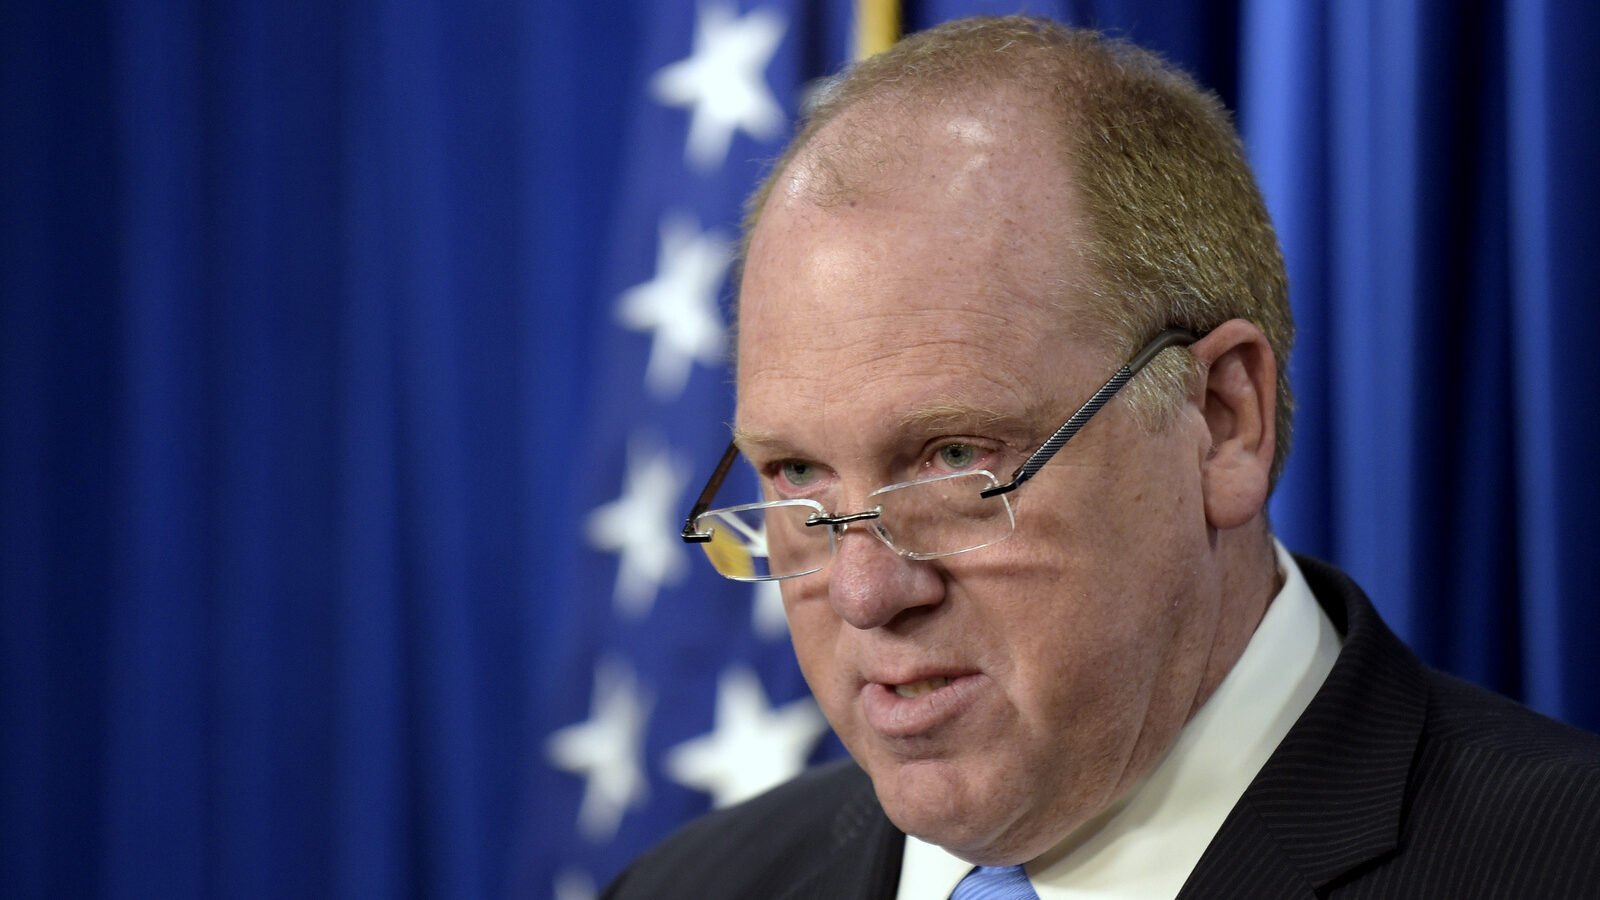 Ice Cheif Tom Homan speaks at the announcement of the new Victims of Immigration Crime Engagement (VOICE) office at a news conference in Washington, April 26, 2017. (AP/Susan Walsh)